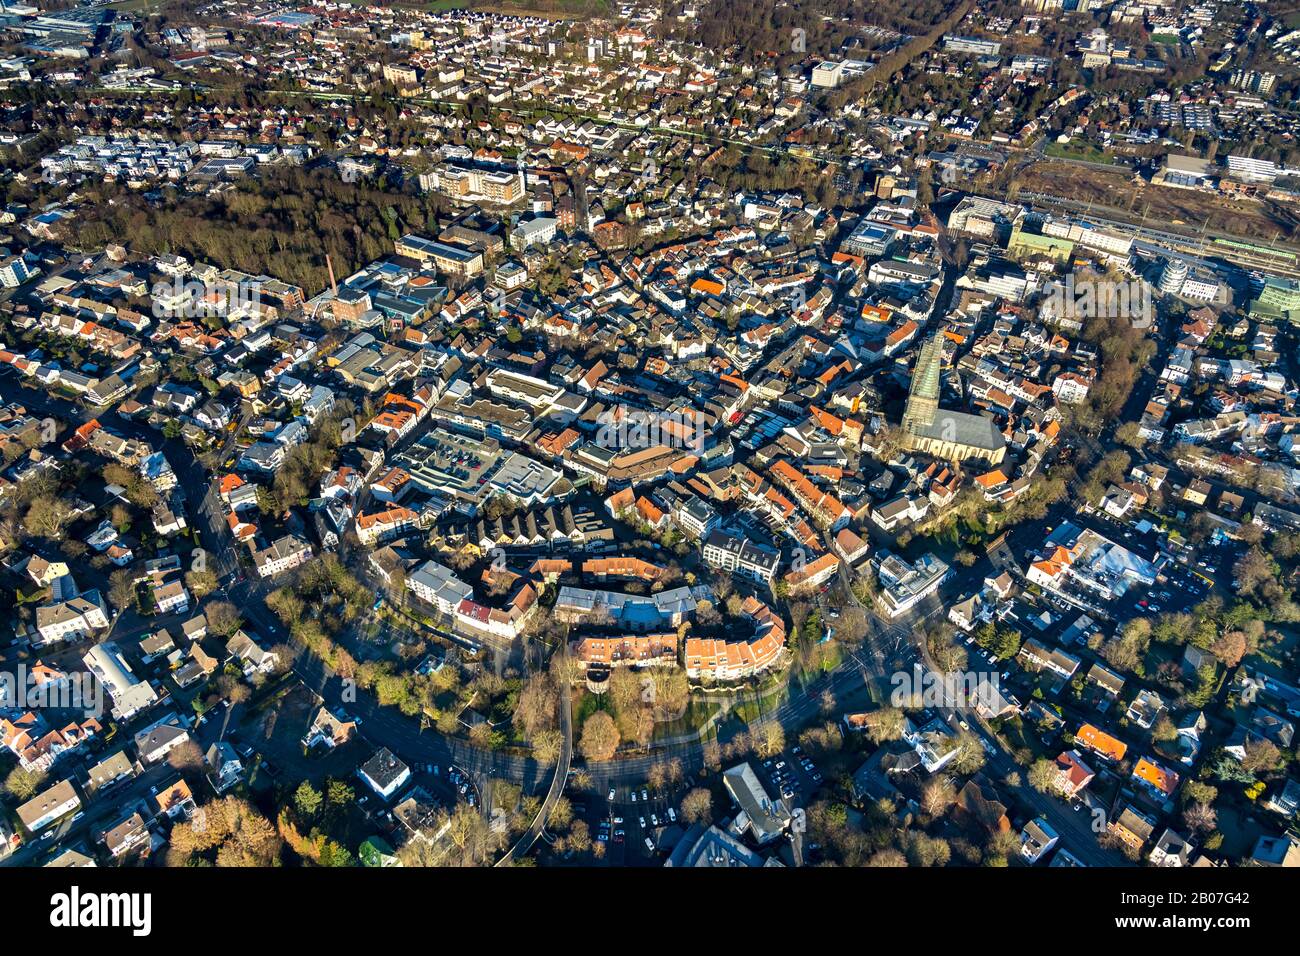 Aerial view, market day in the city centre of Unna, market at the Alter Markt, market place, , Unna, Ruhr area, North Rhine-Westphalia, Germany, DE, E Stock Photo